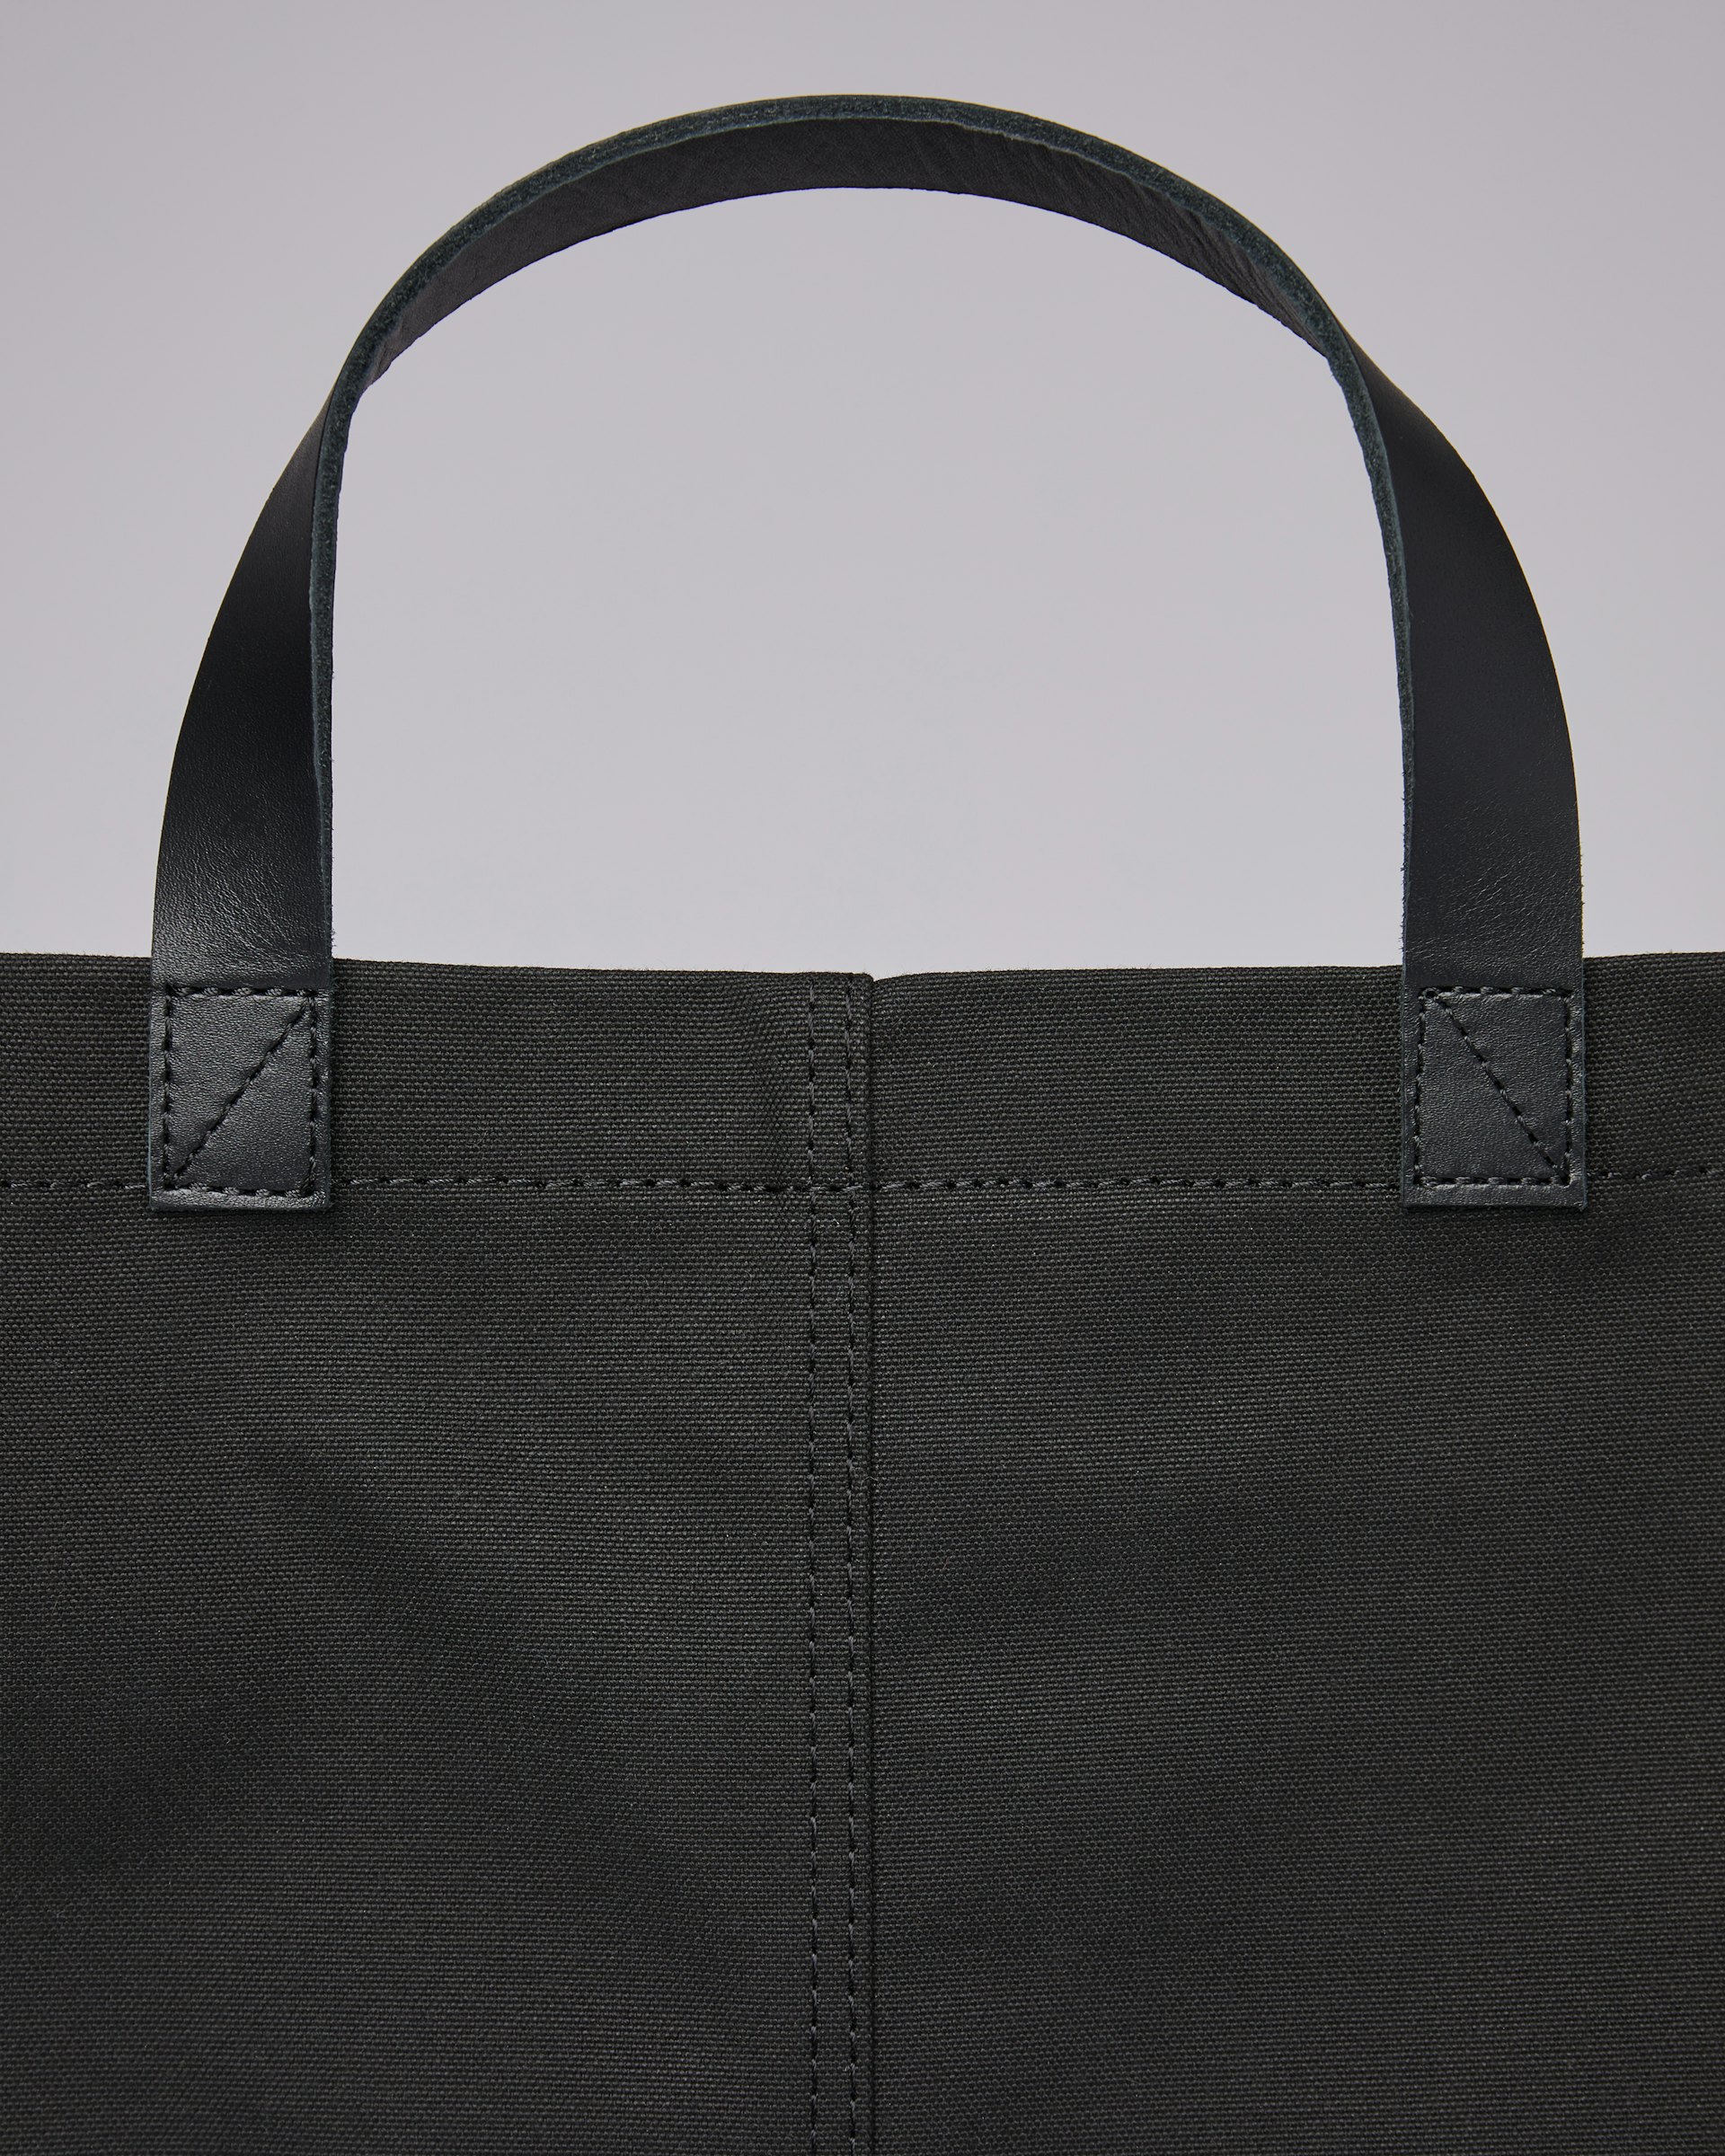 Frankie belongs to the category Tote bags and is in color black (2 of 7)